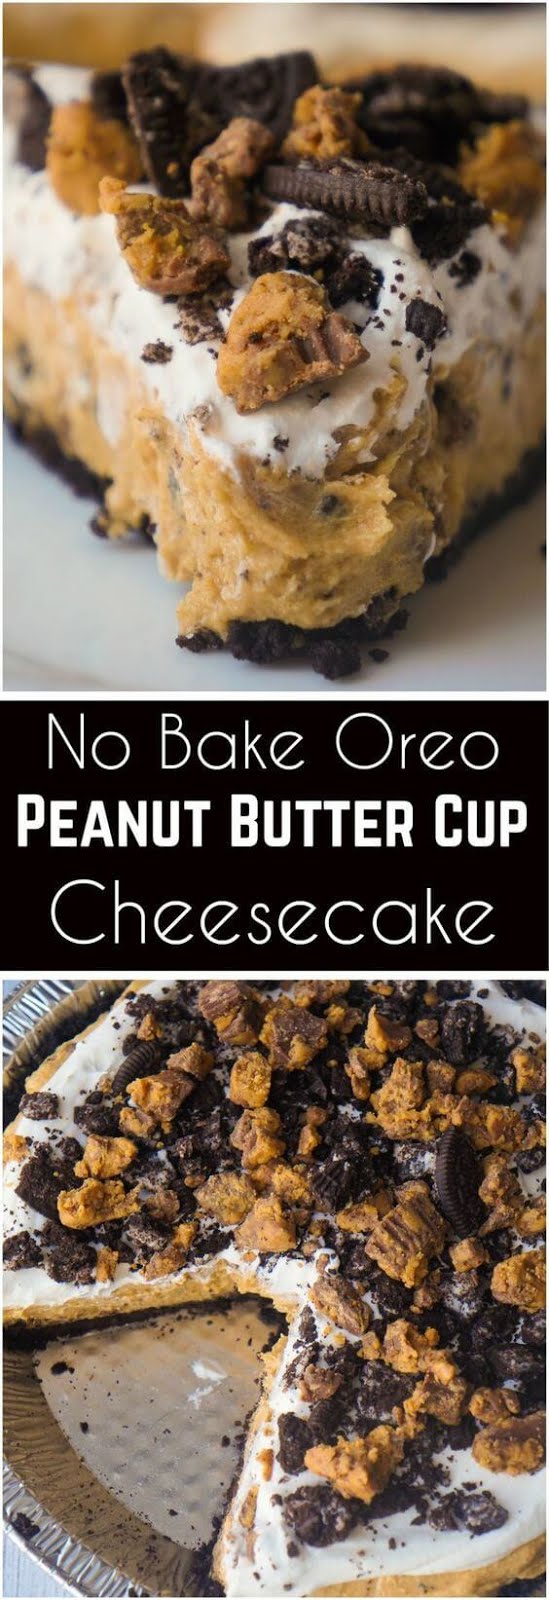 No Bake Oreo Peanut Butter Cup Cheesecake